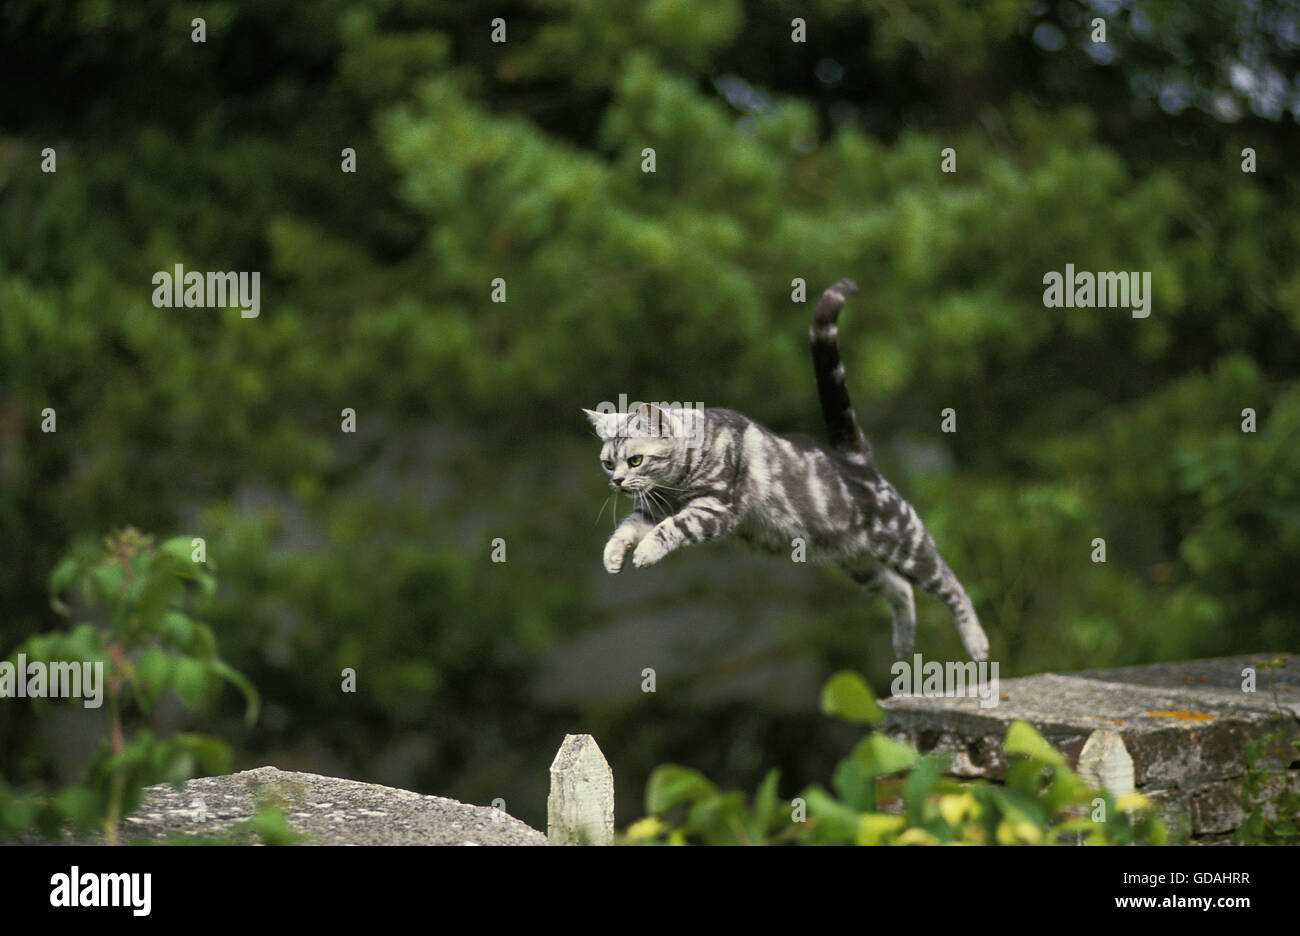 AMERICAN SHORTHAIR, ADULT LEAPING Stock Photo